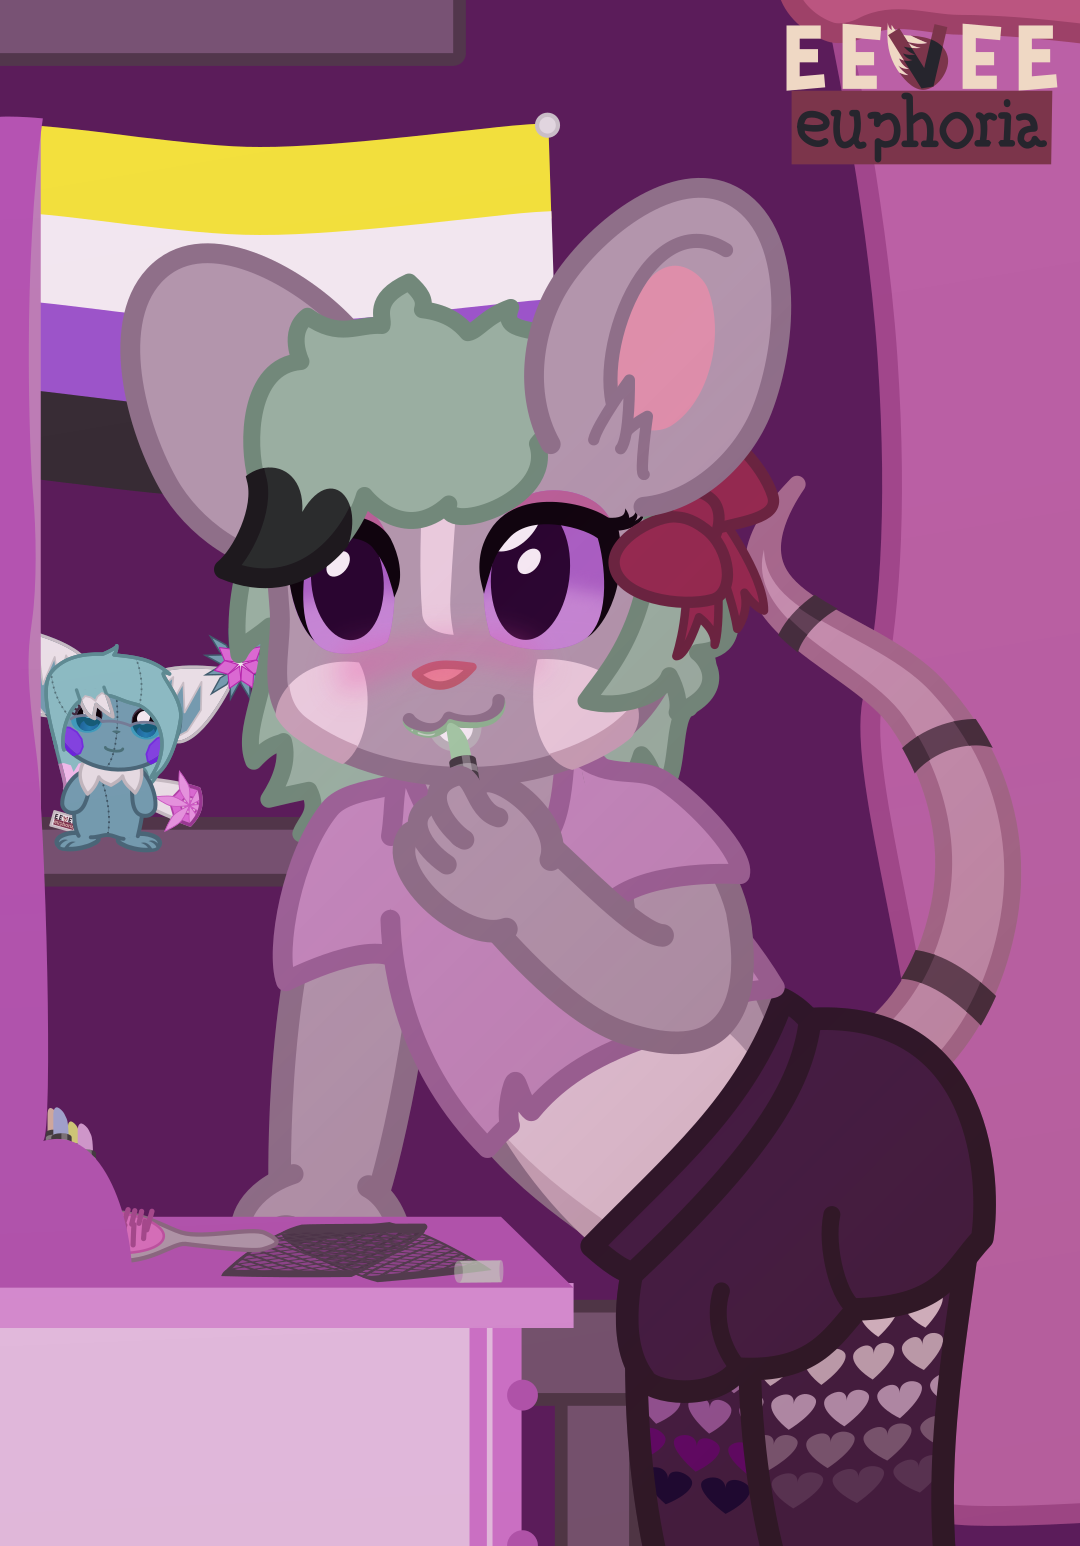 A grey/white mouse with green hair, looking into a mirror and putting on green lipstick. background has a plushie, and a non-binary flag on the wall